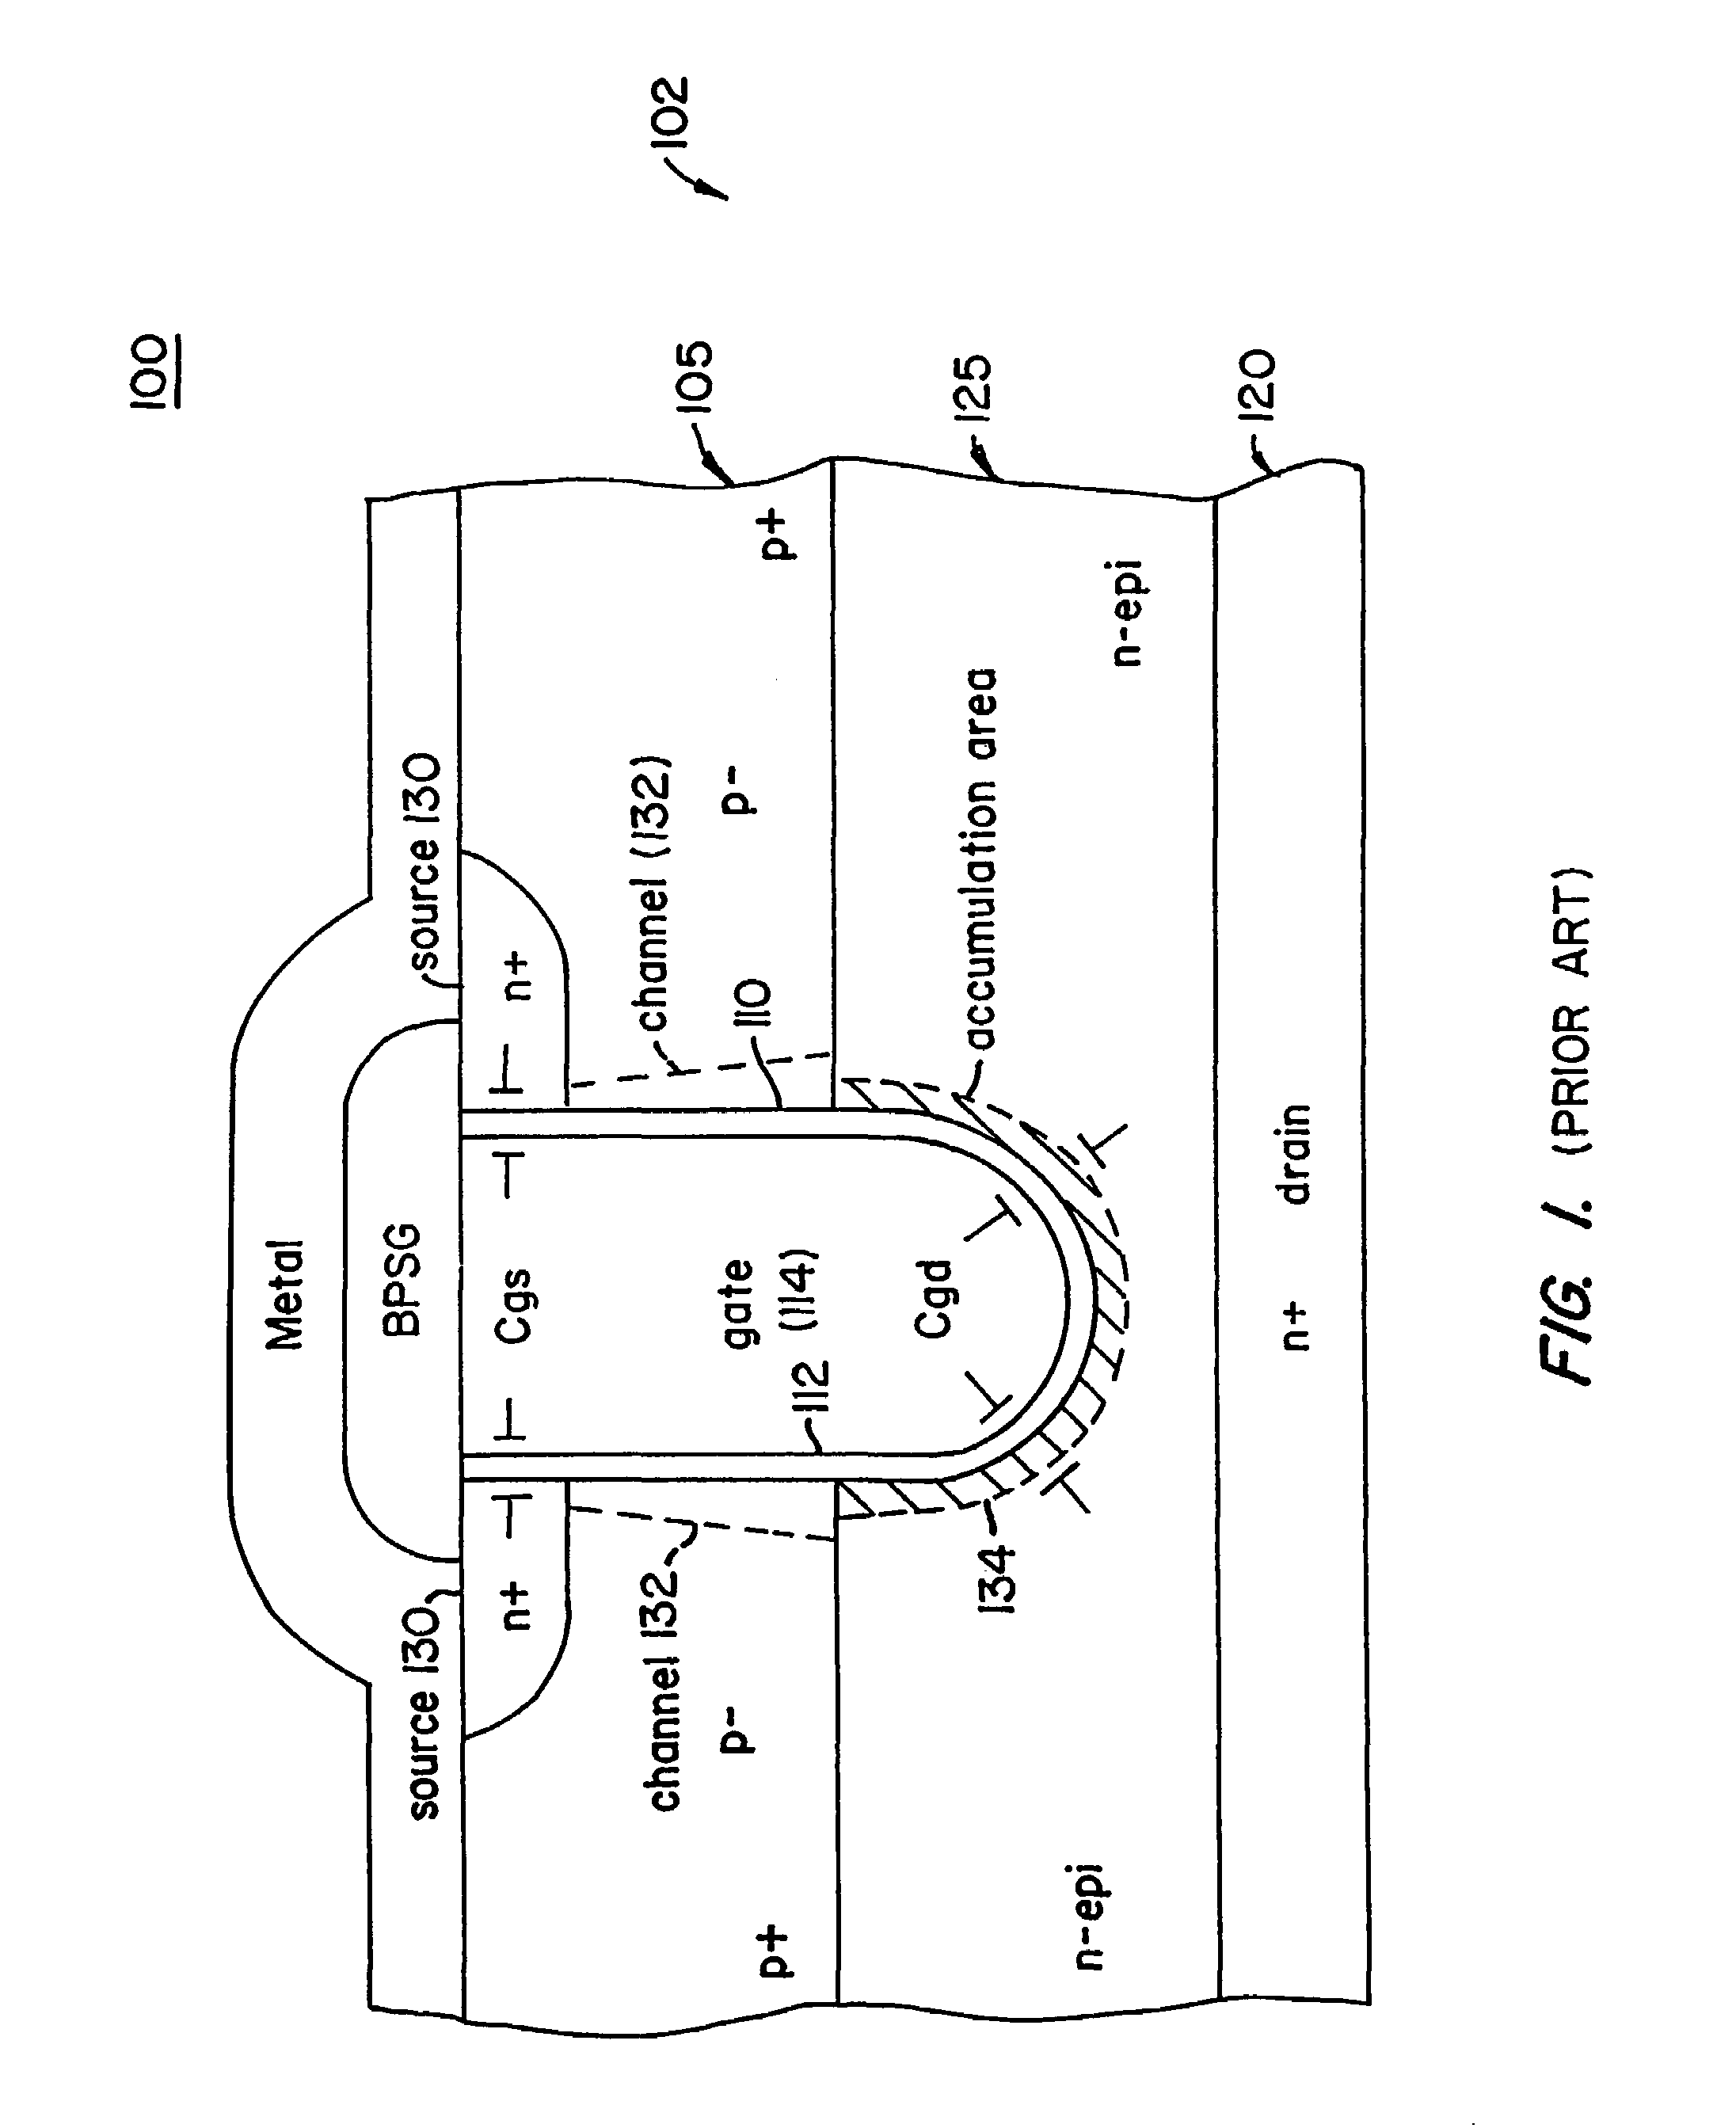 Power MOS device with improved gate charge performance